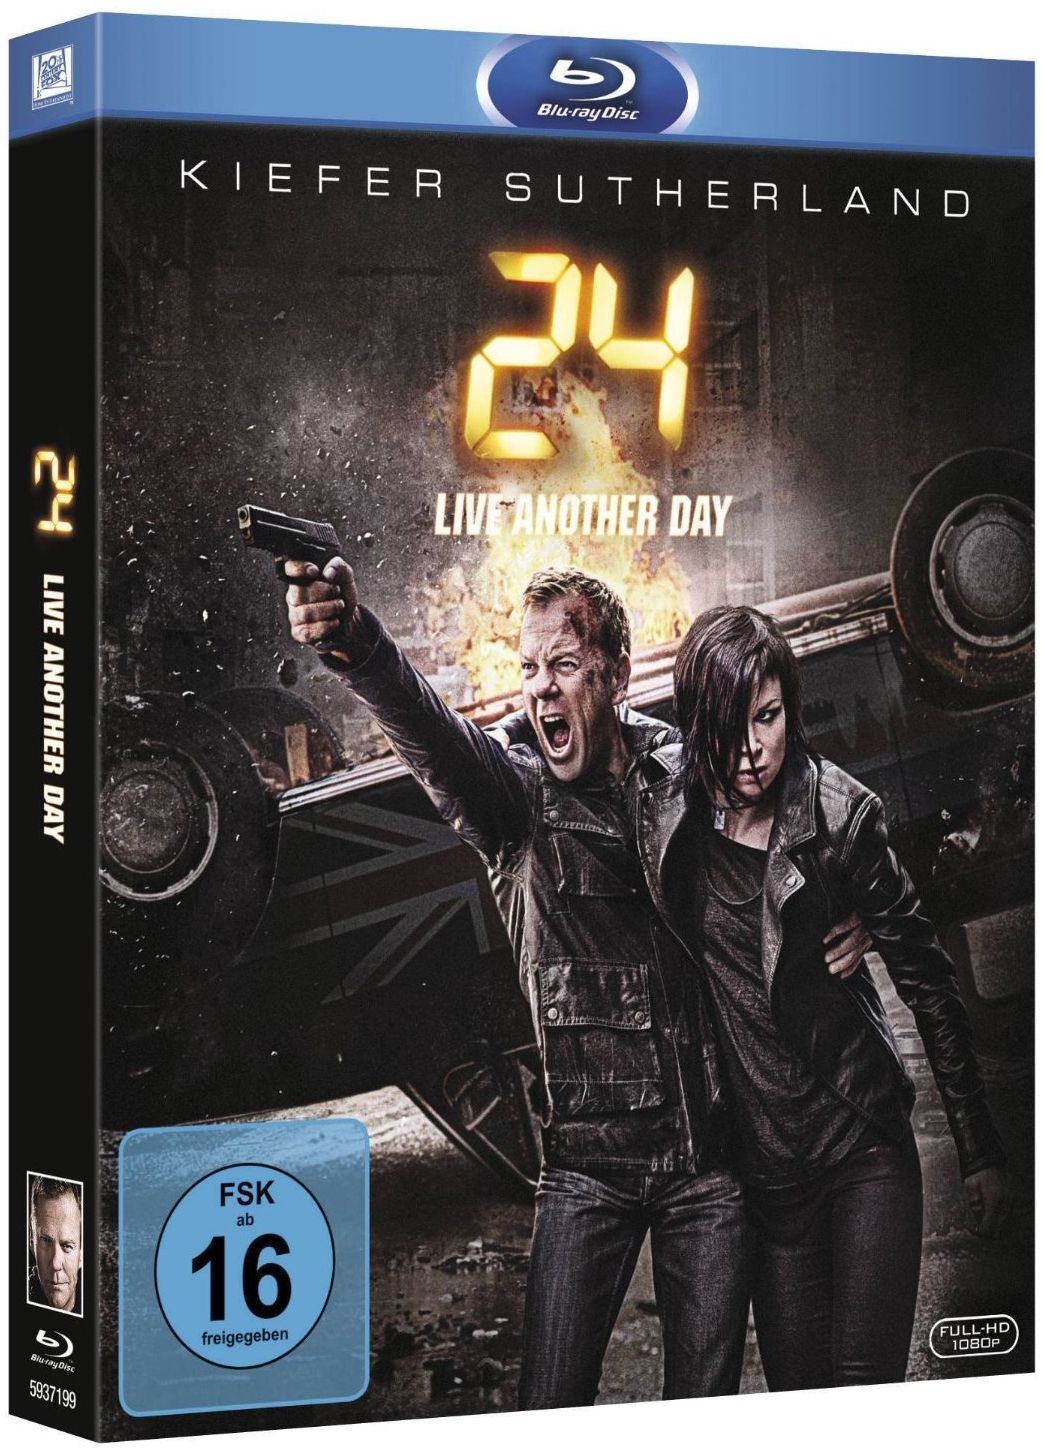 24 Live Another Day - Season 9 (3 Discs) (BLURAY)